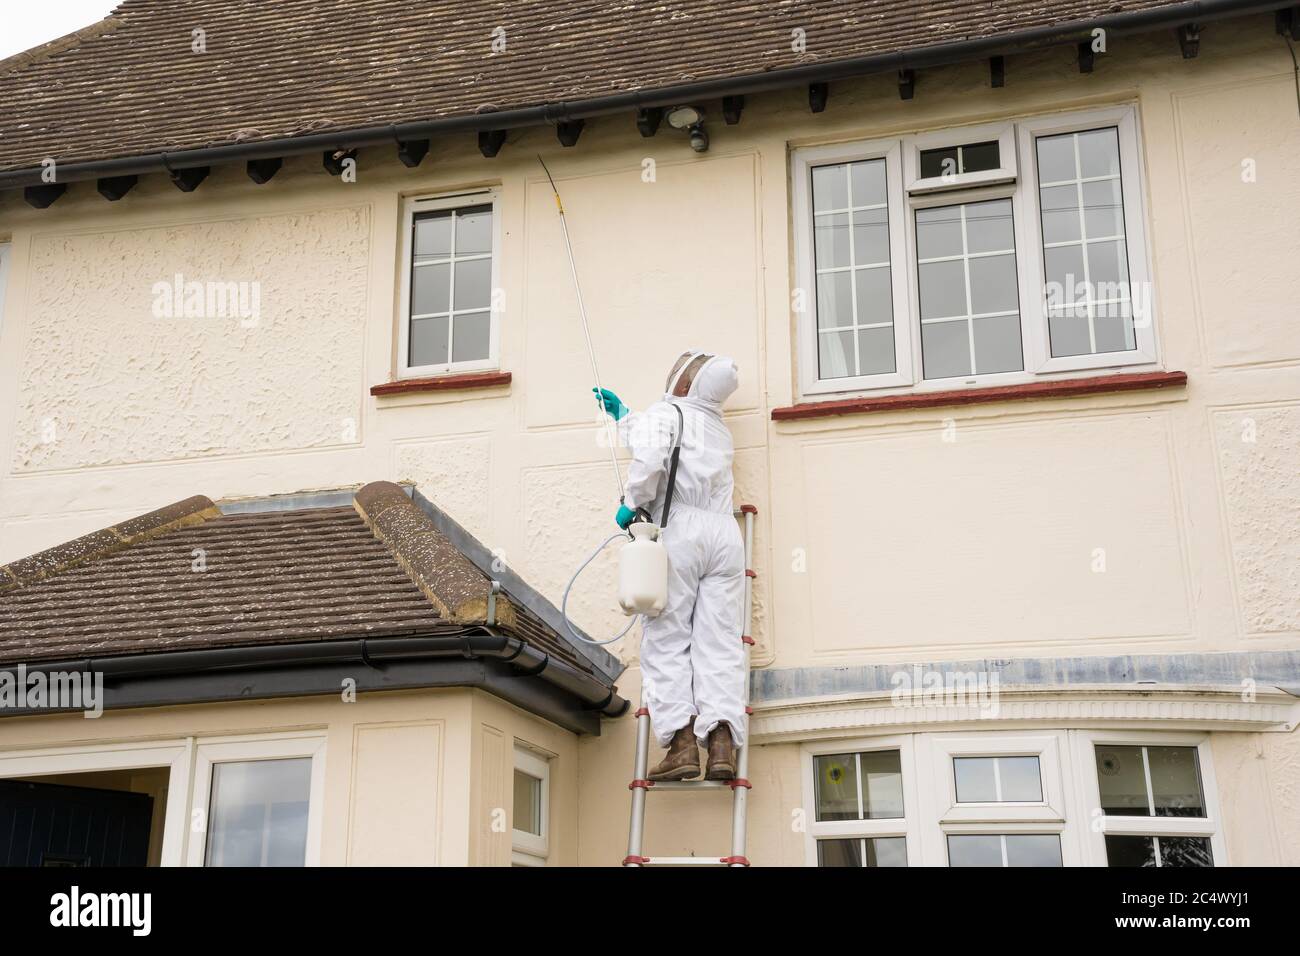 Unidentifiable Pest Controller in protective clothing on a ladder spraying wasp killer treatment on the eaves of a house. Hertfordshire, England UK Stock Photo